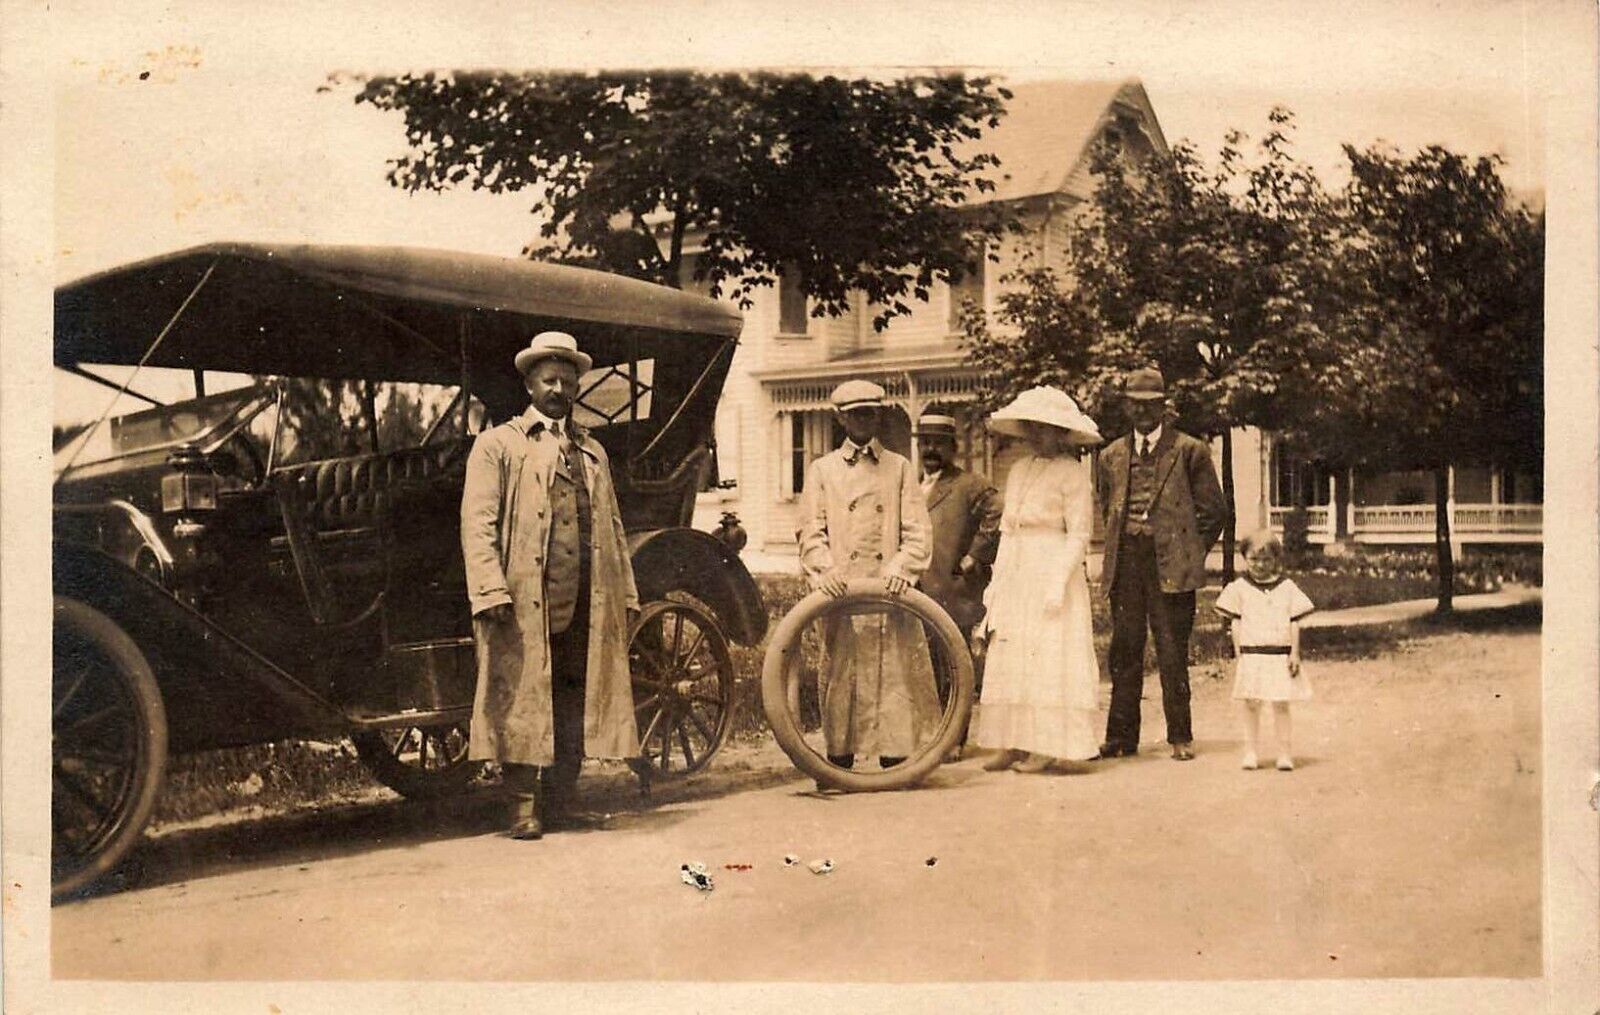 ANTIQUE REAL PHOTO RPPC POSTCARD: NICELY DRESSED FAMILY CHANGING CAR / AUTO TIRE